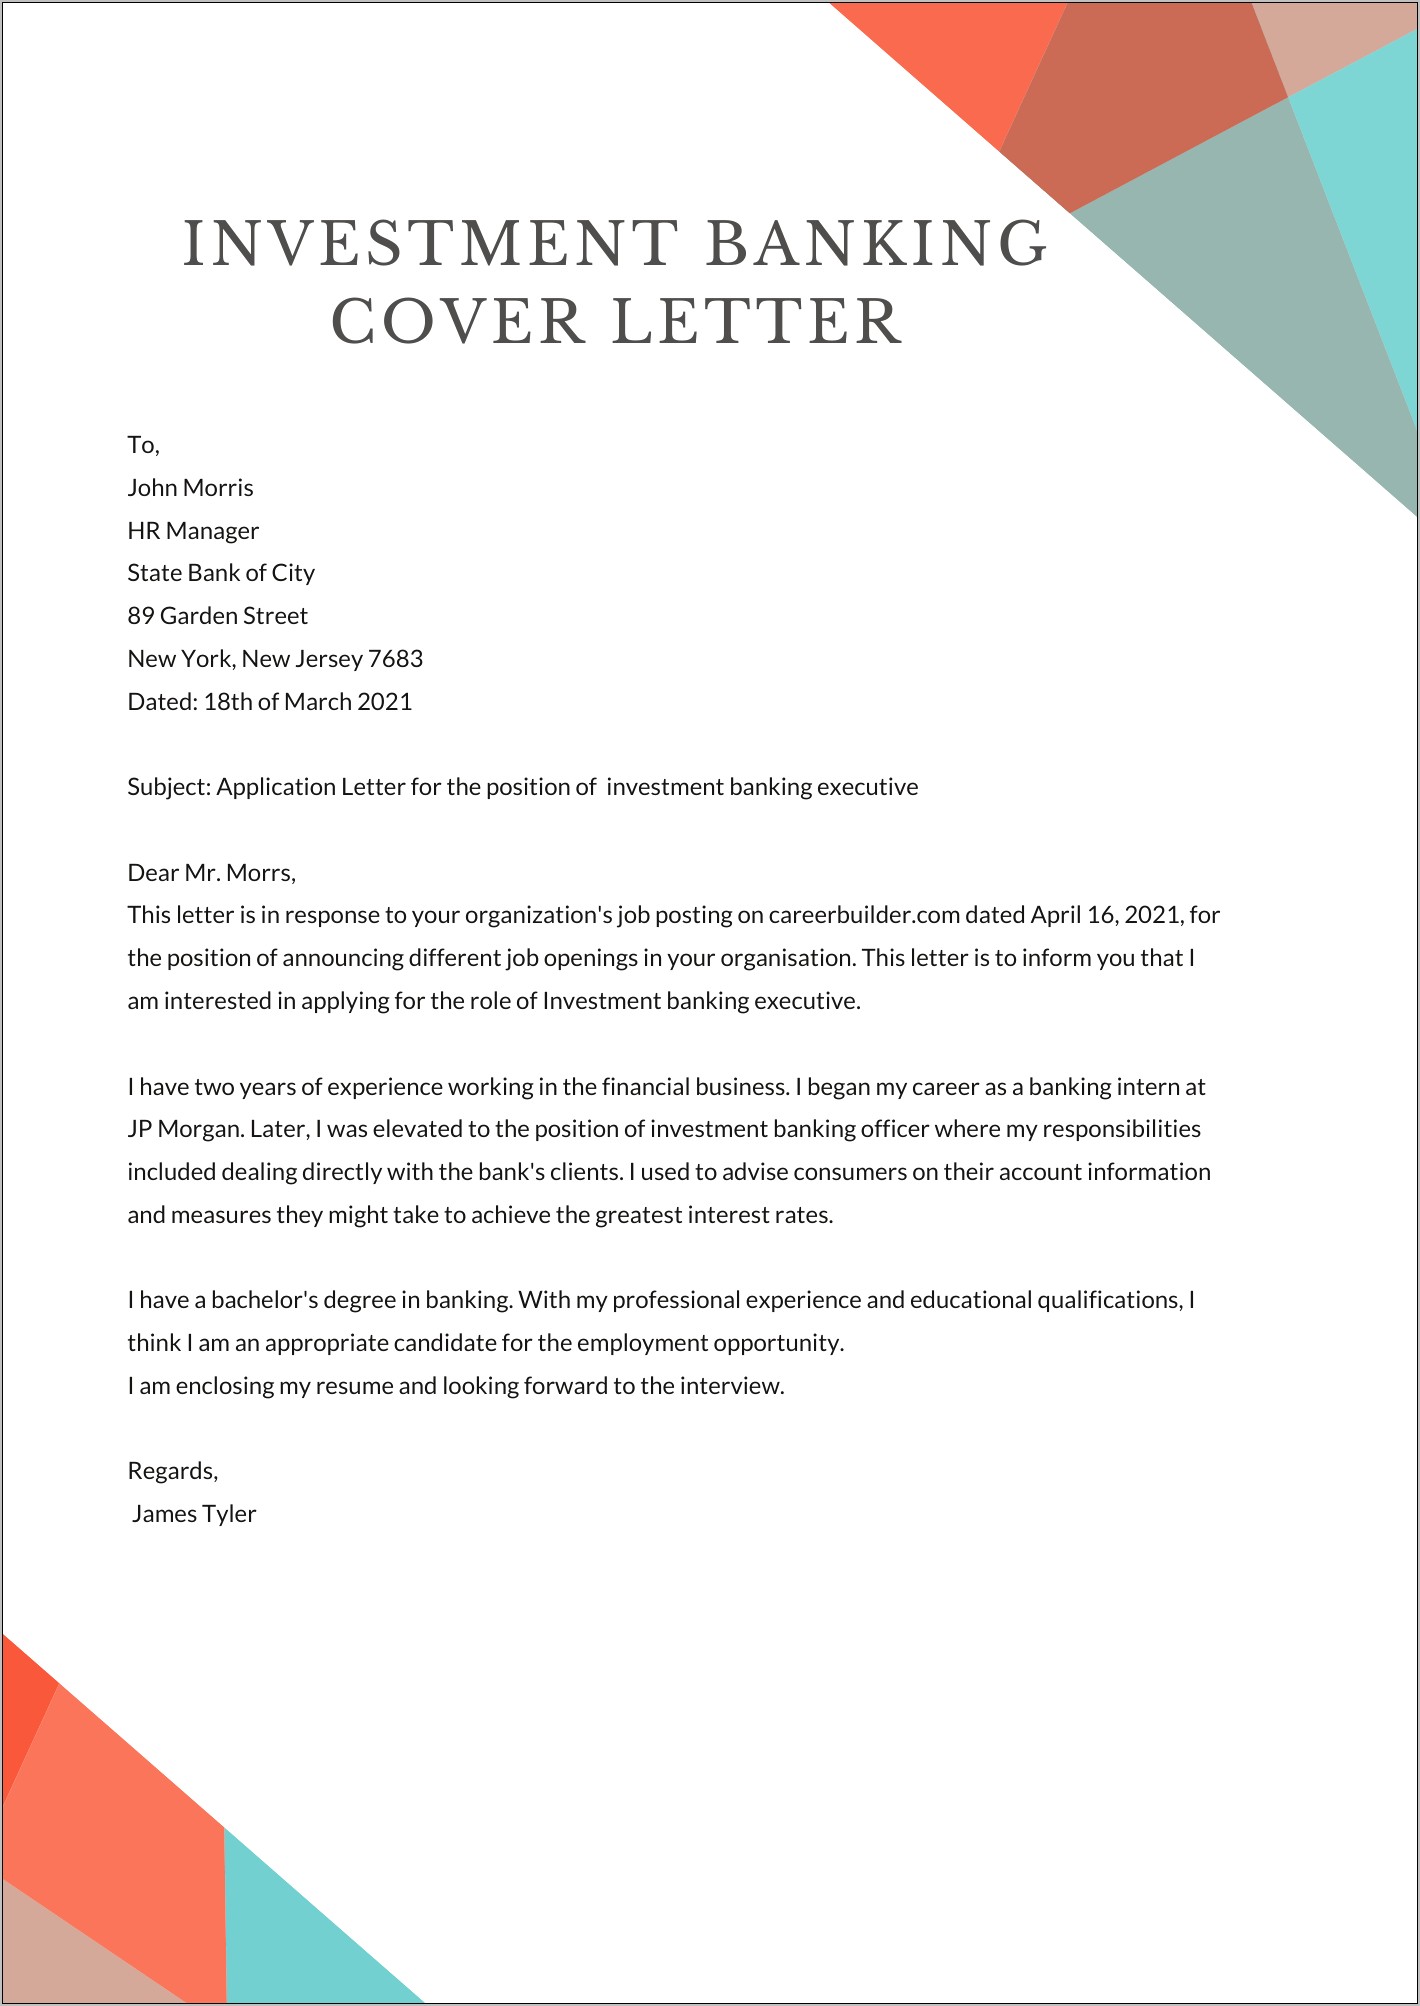 Resume Cover Letter To A Bank